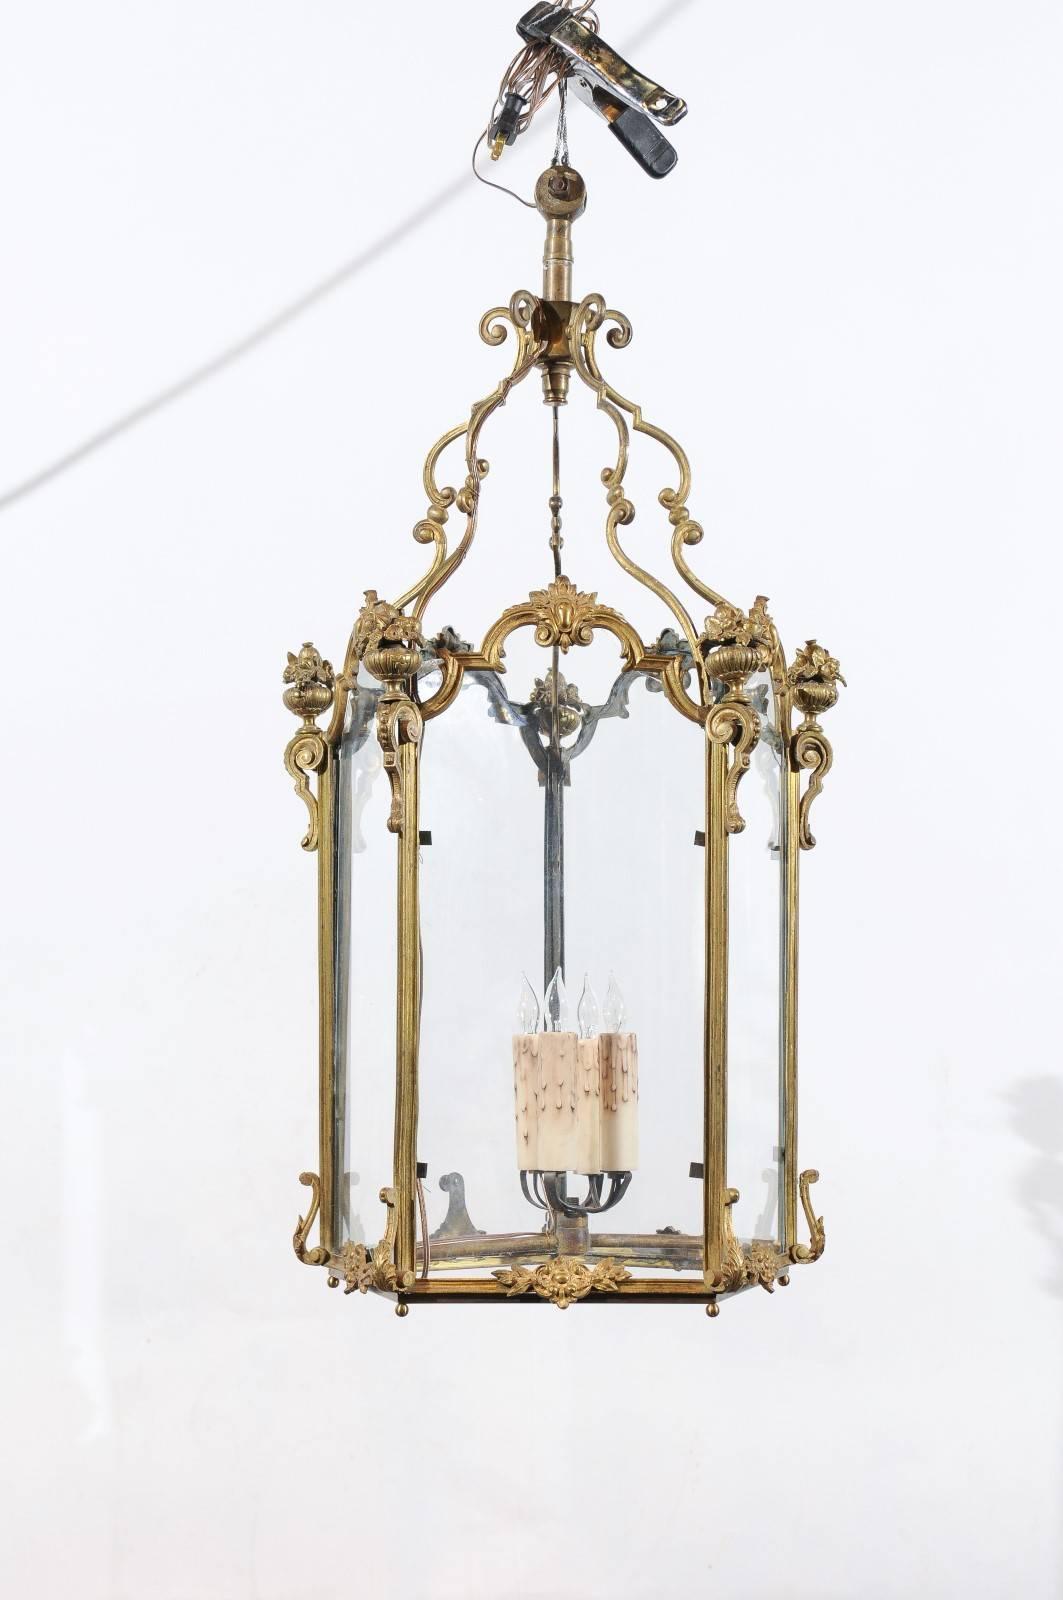 Large Louis XV style gilt bronze 5-sided Lantern with 4 lights, France ca. 1880.